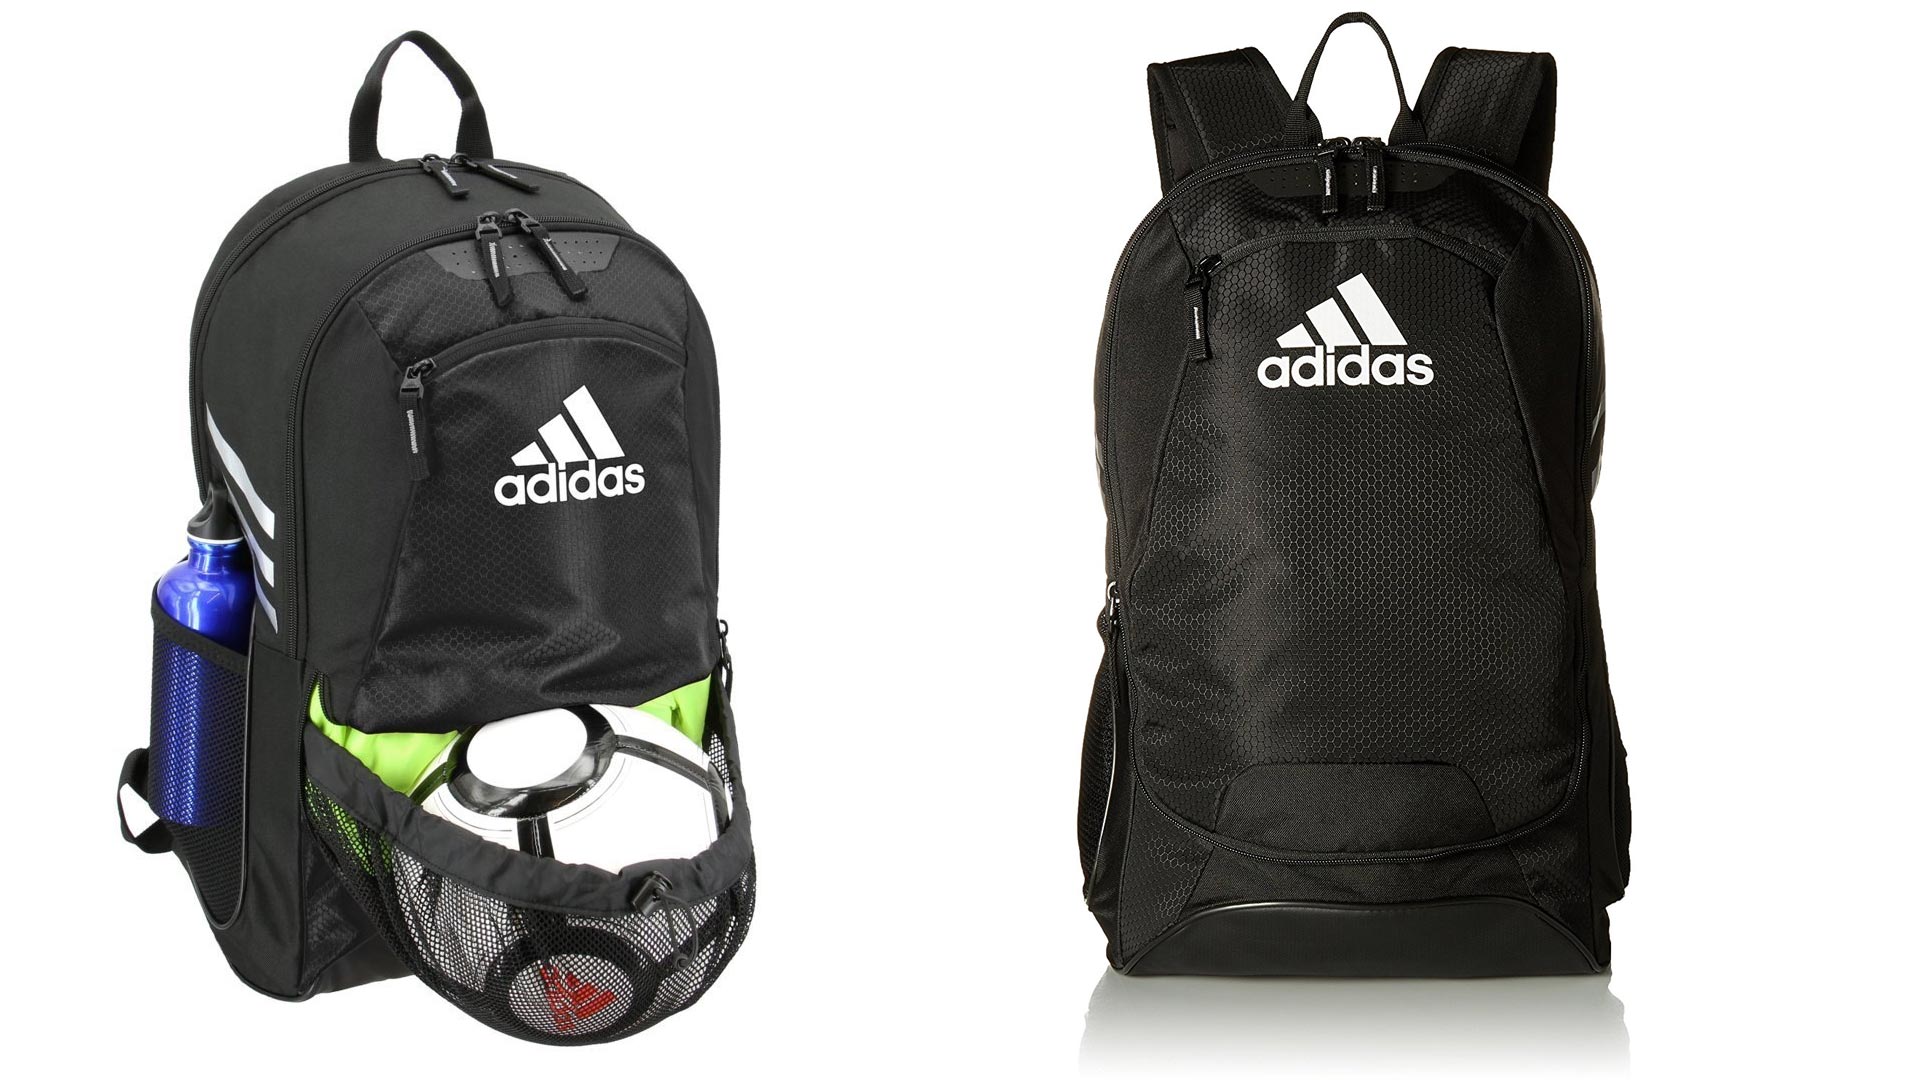 The adidas Stadium II backpack can hold 